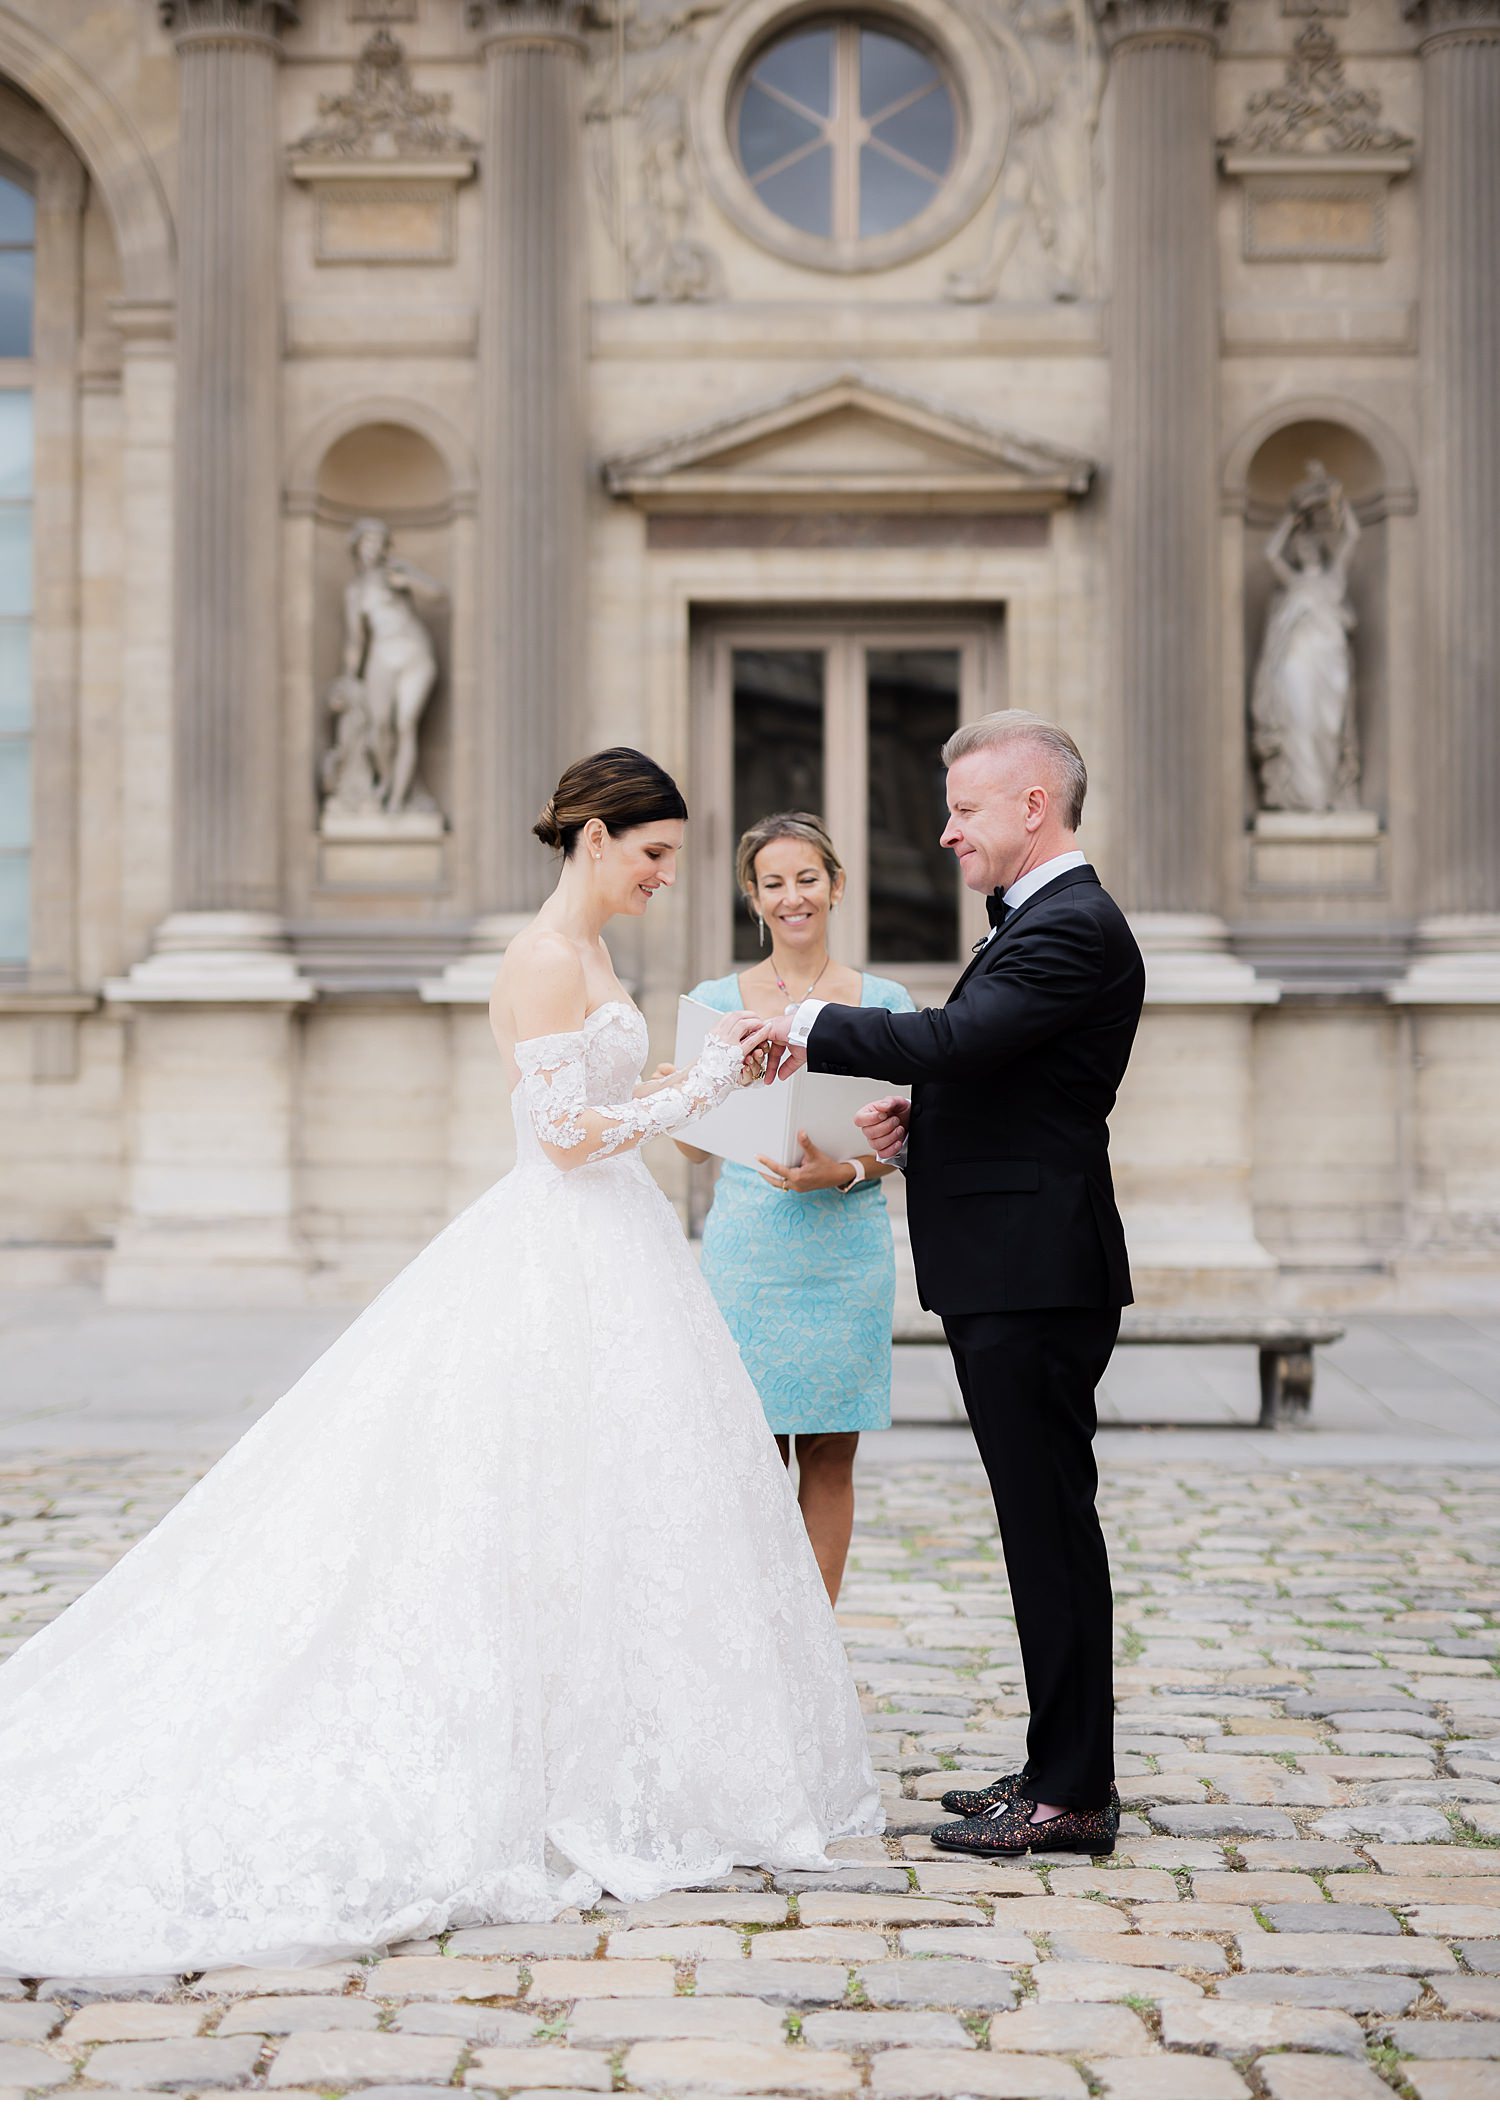 Elopement ceremony in Paris, Ceremony at the Louvre, Get married in Paris, Elope to Paris, celebrant in France, officiant in Paris